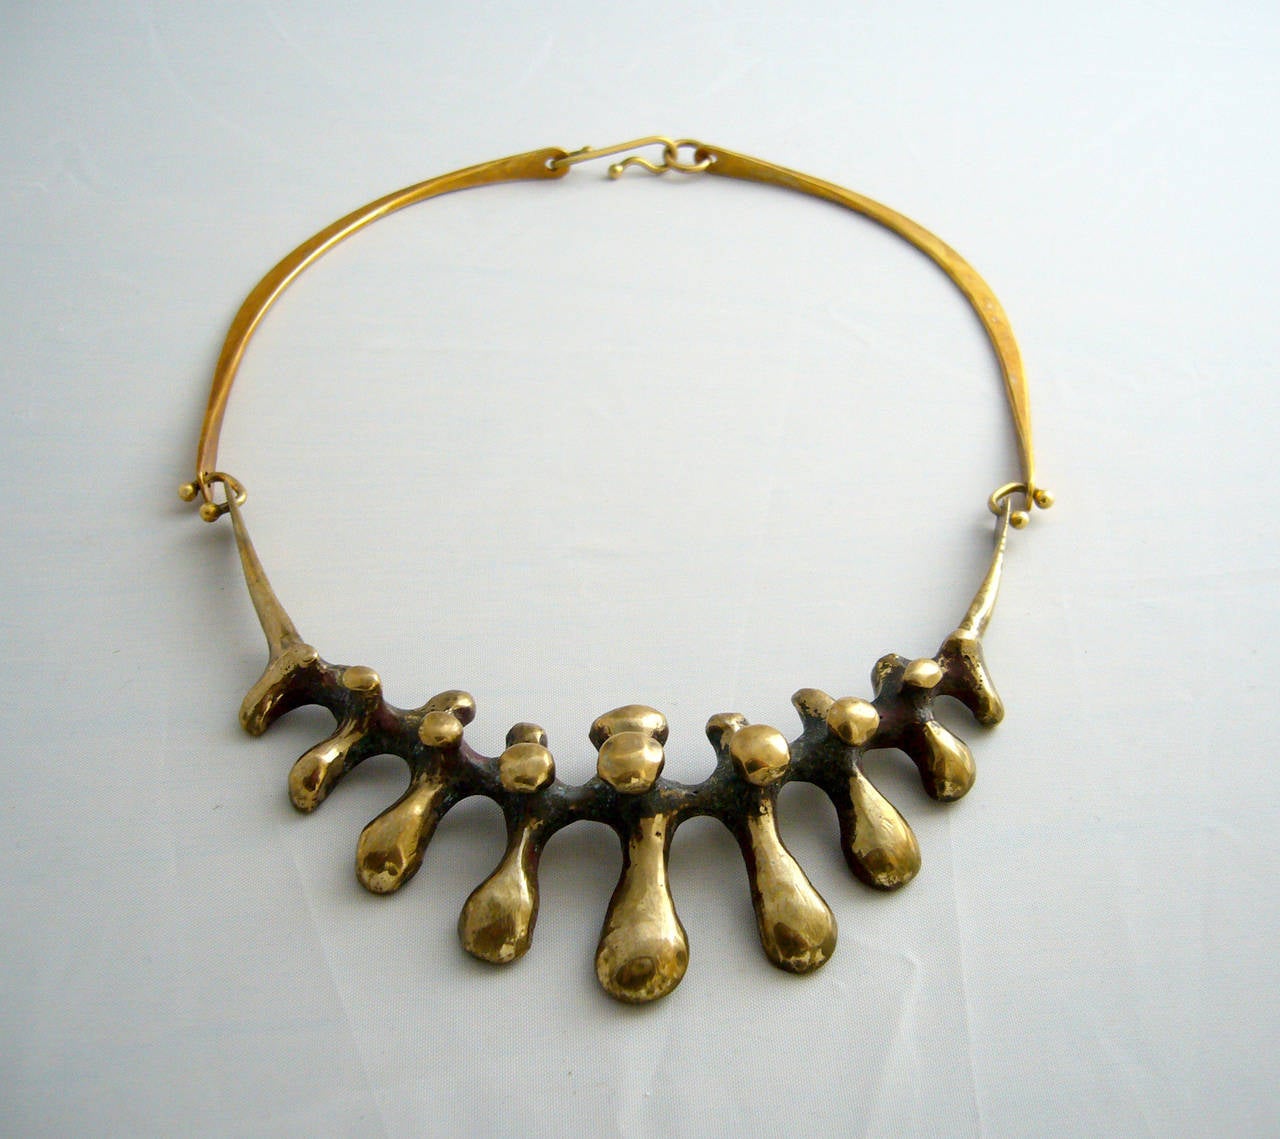 A welded drippy bronze hinged necklace created by Jack Boyd, circa 1960's.  Necklace has a wearable length of  approximately 17.5